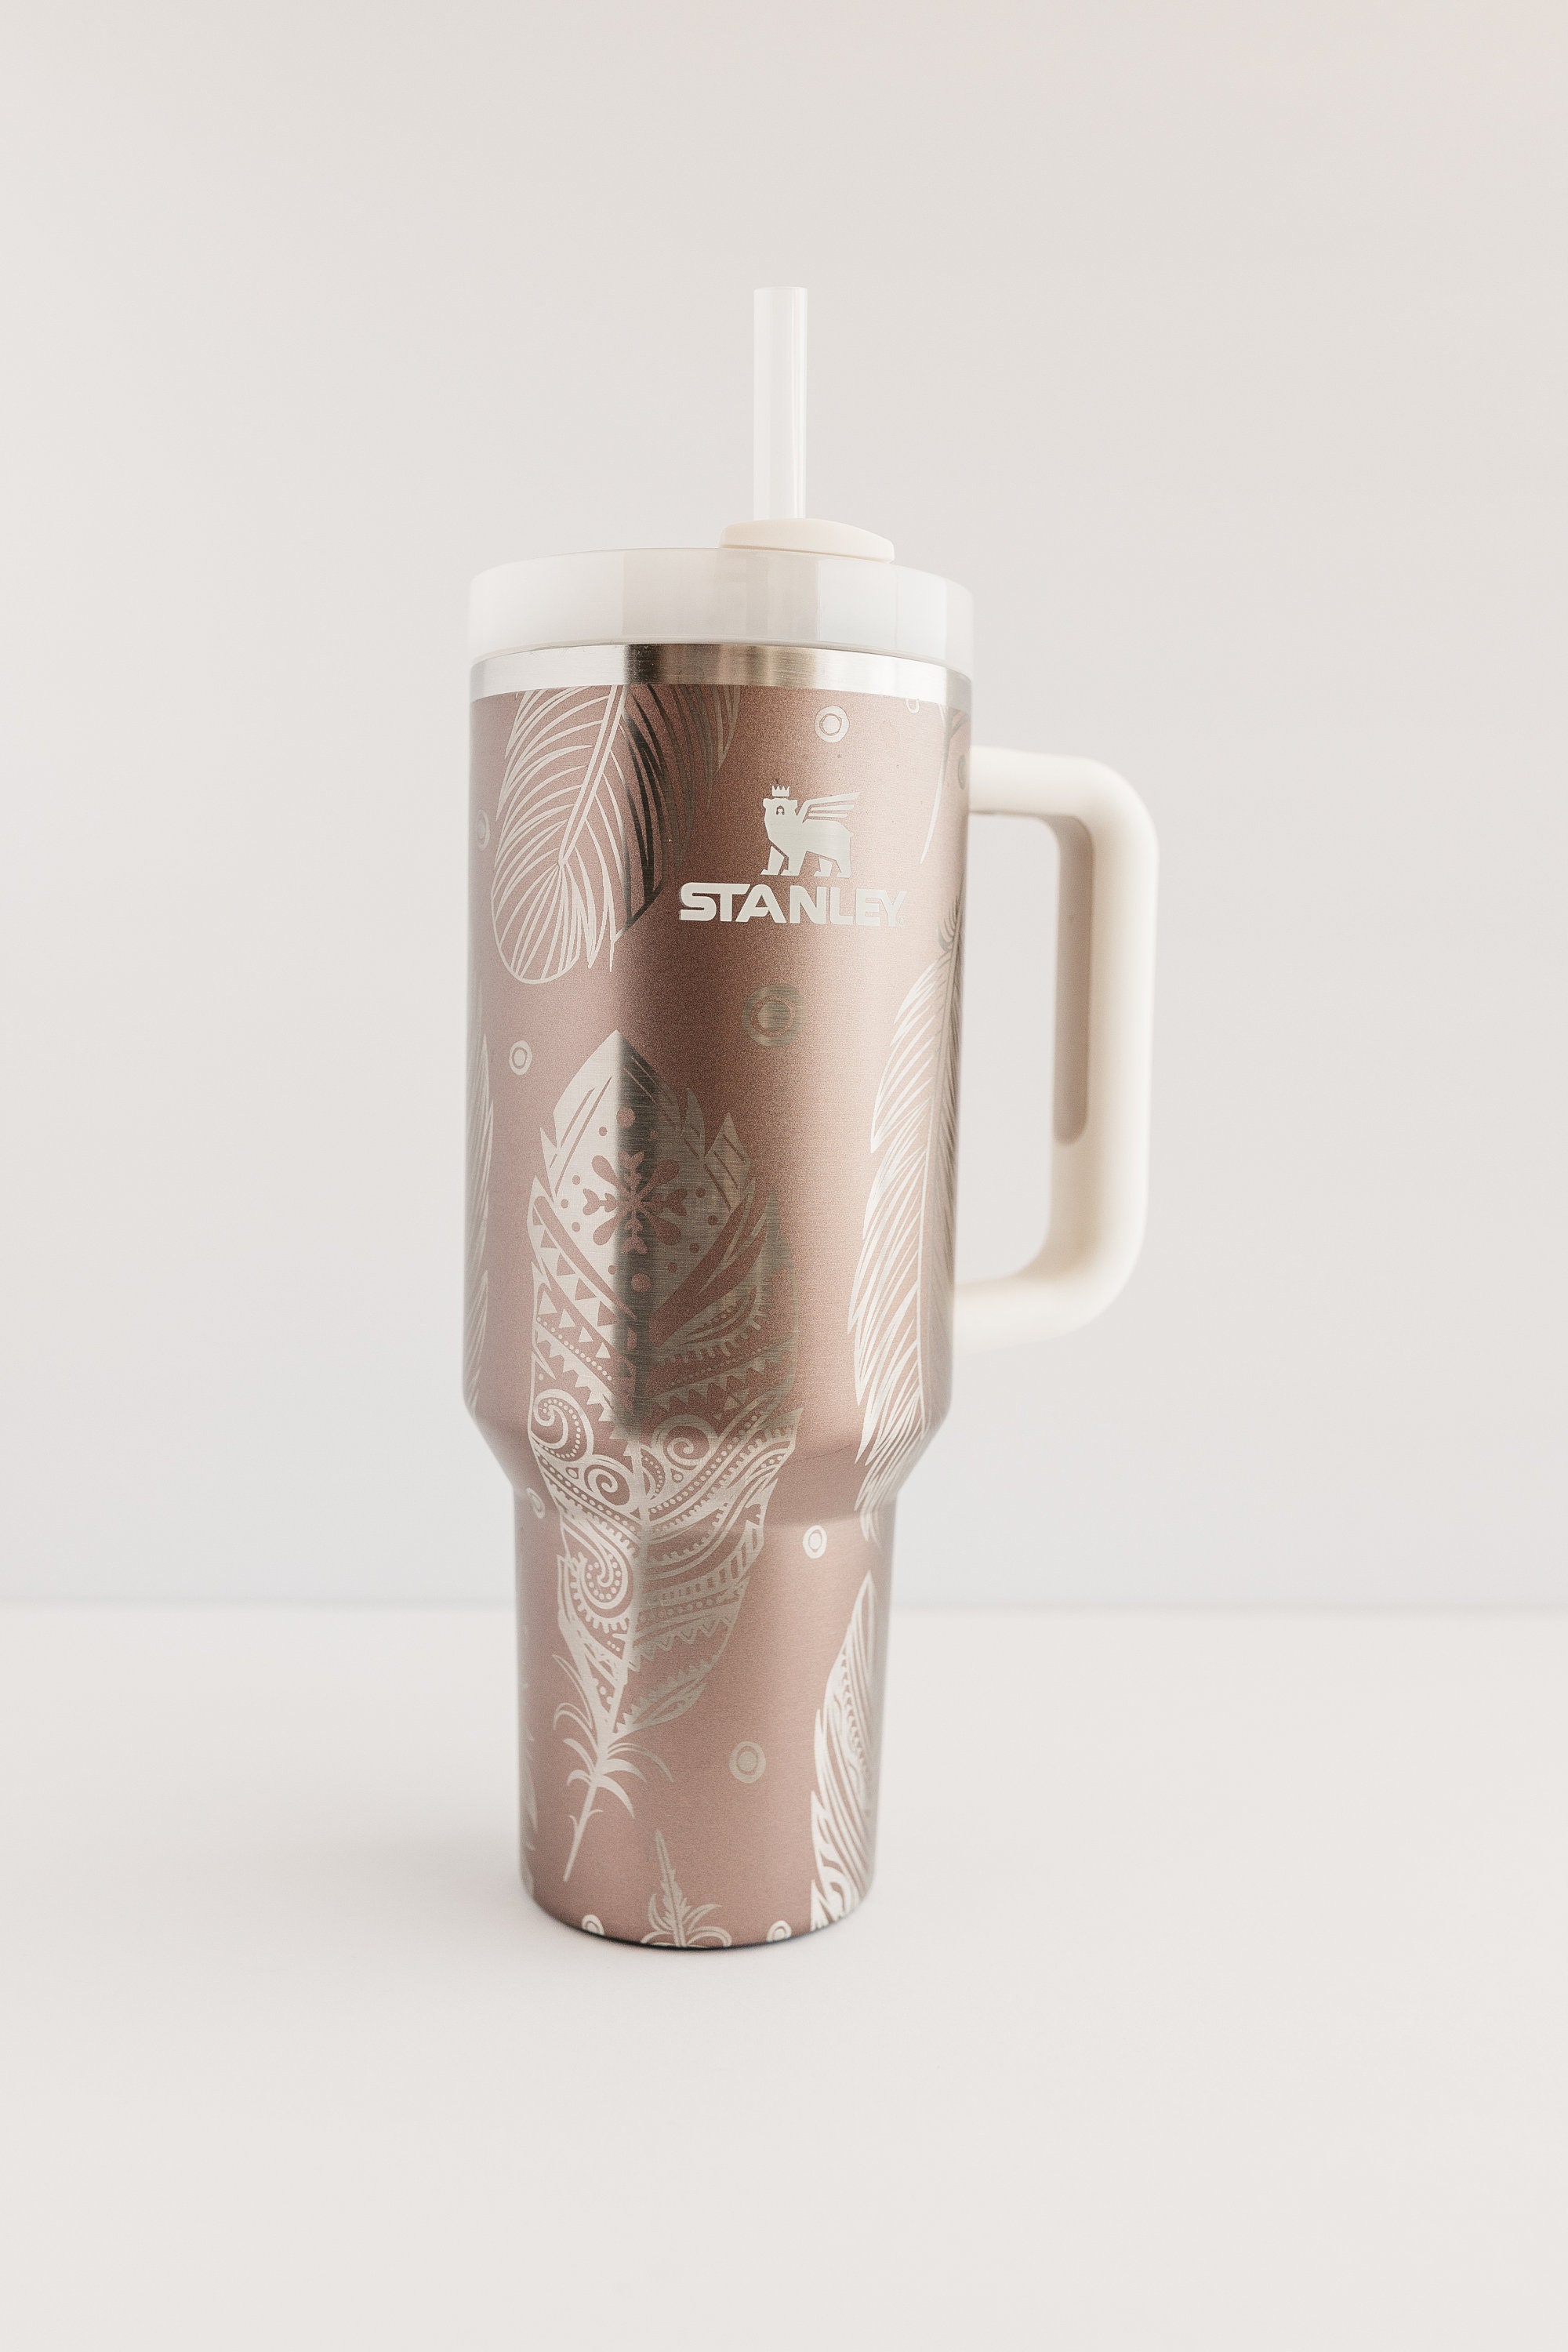 Girl Gets Stanley Water Tumbler for Her Birthday and Couldn't Be